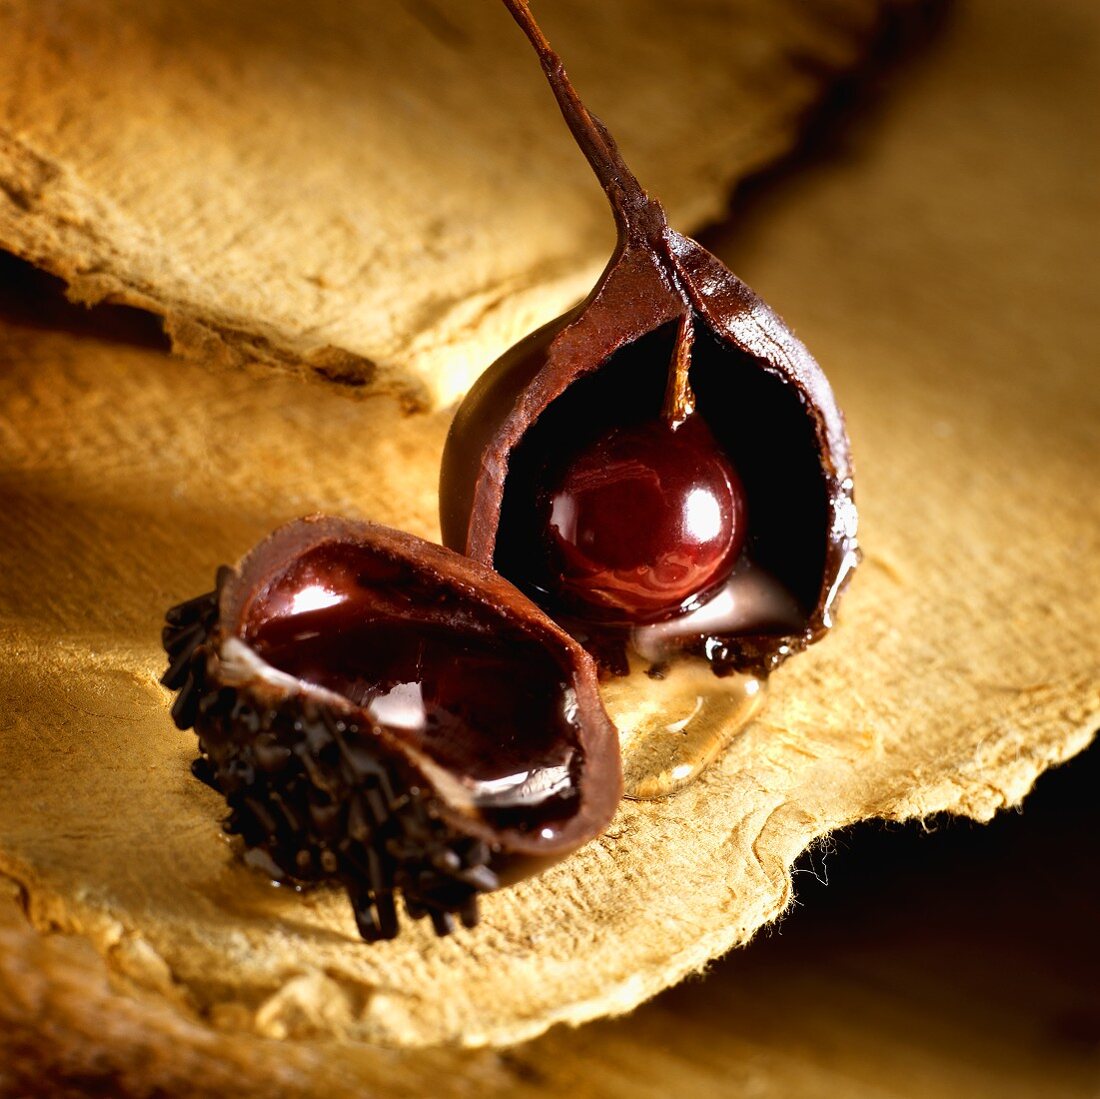 Halved chocolate, filled with cherry and cherry liqueur